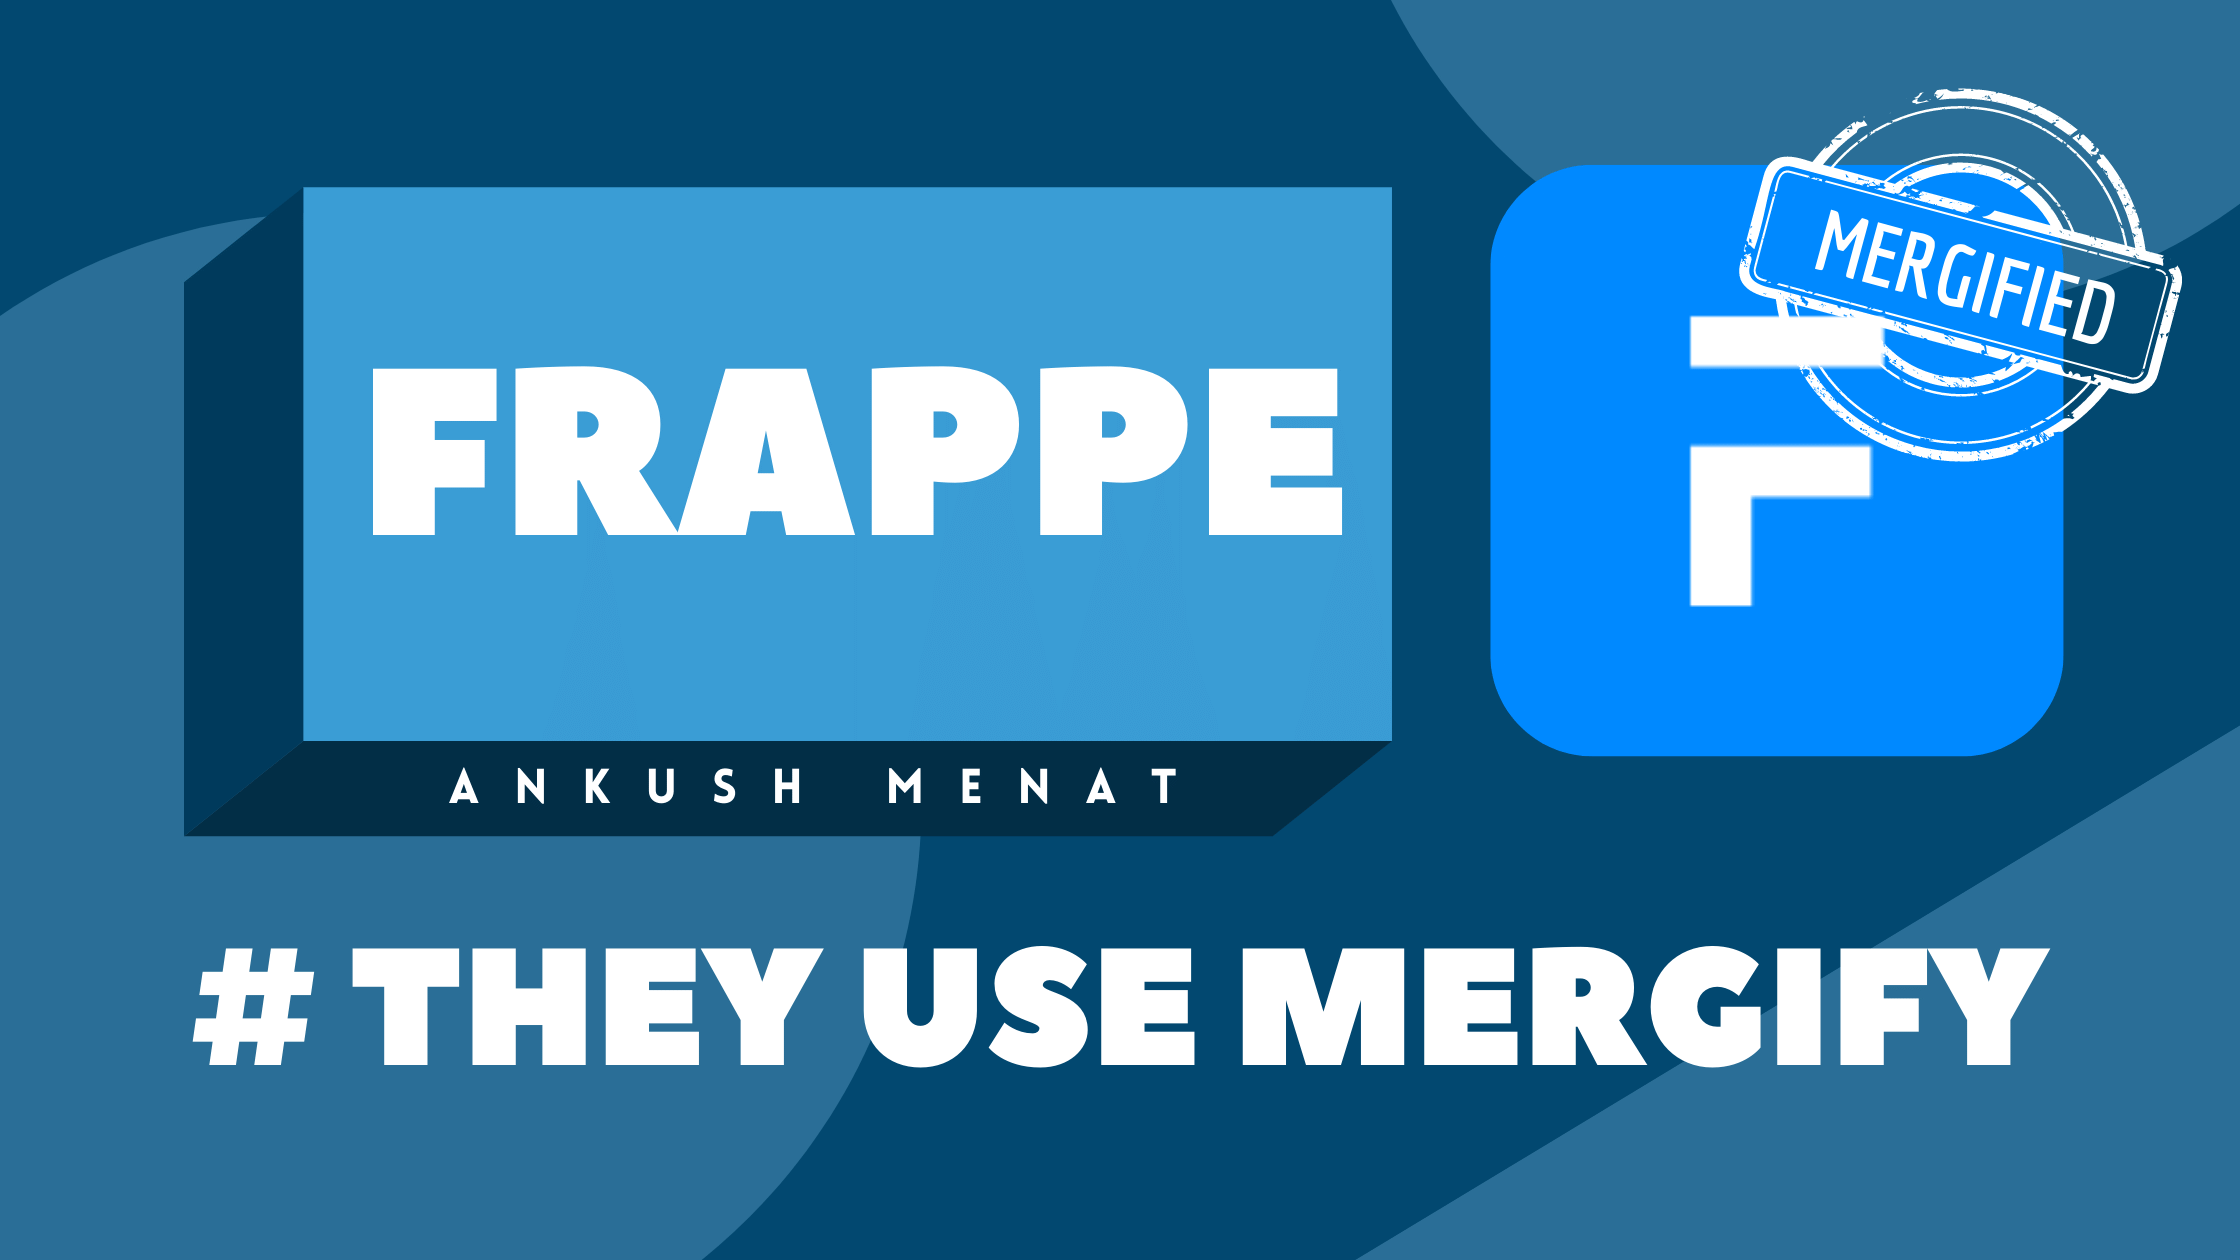 They Use Mergify: FRAPPE